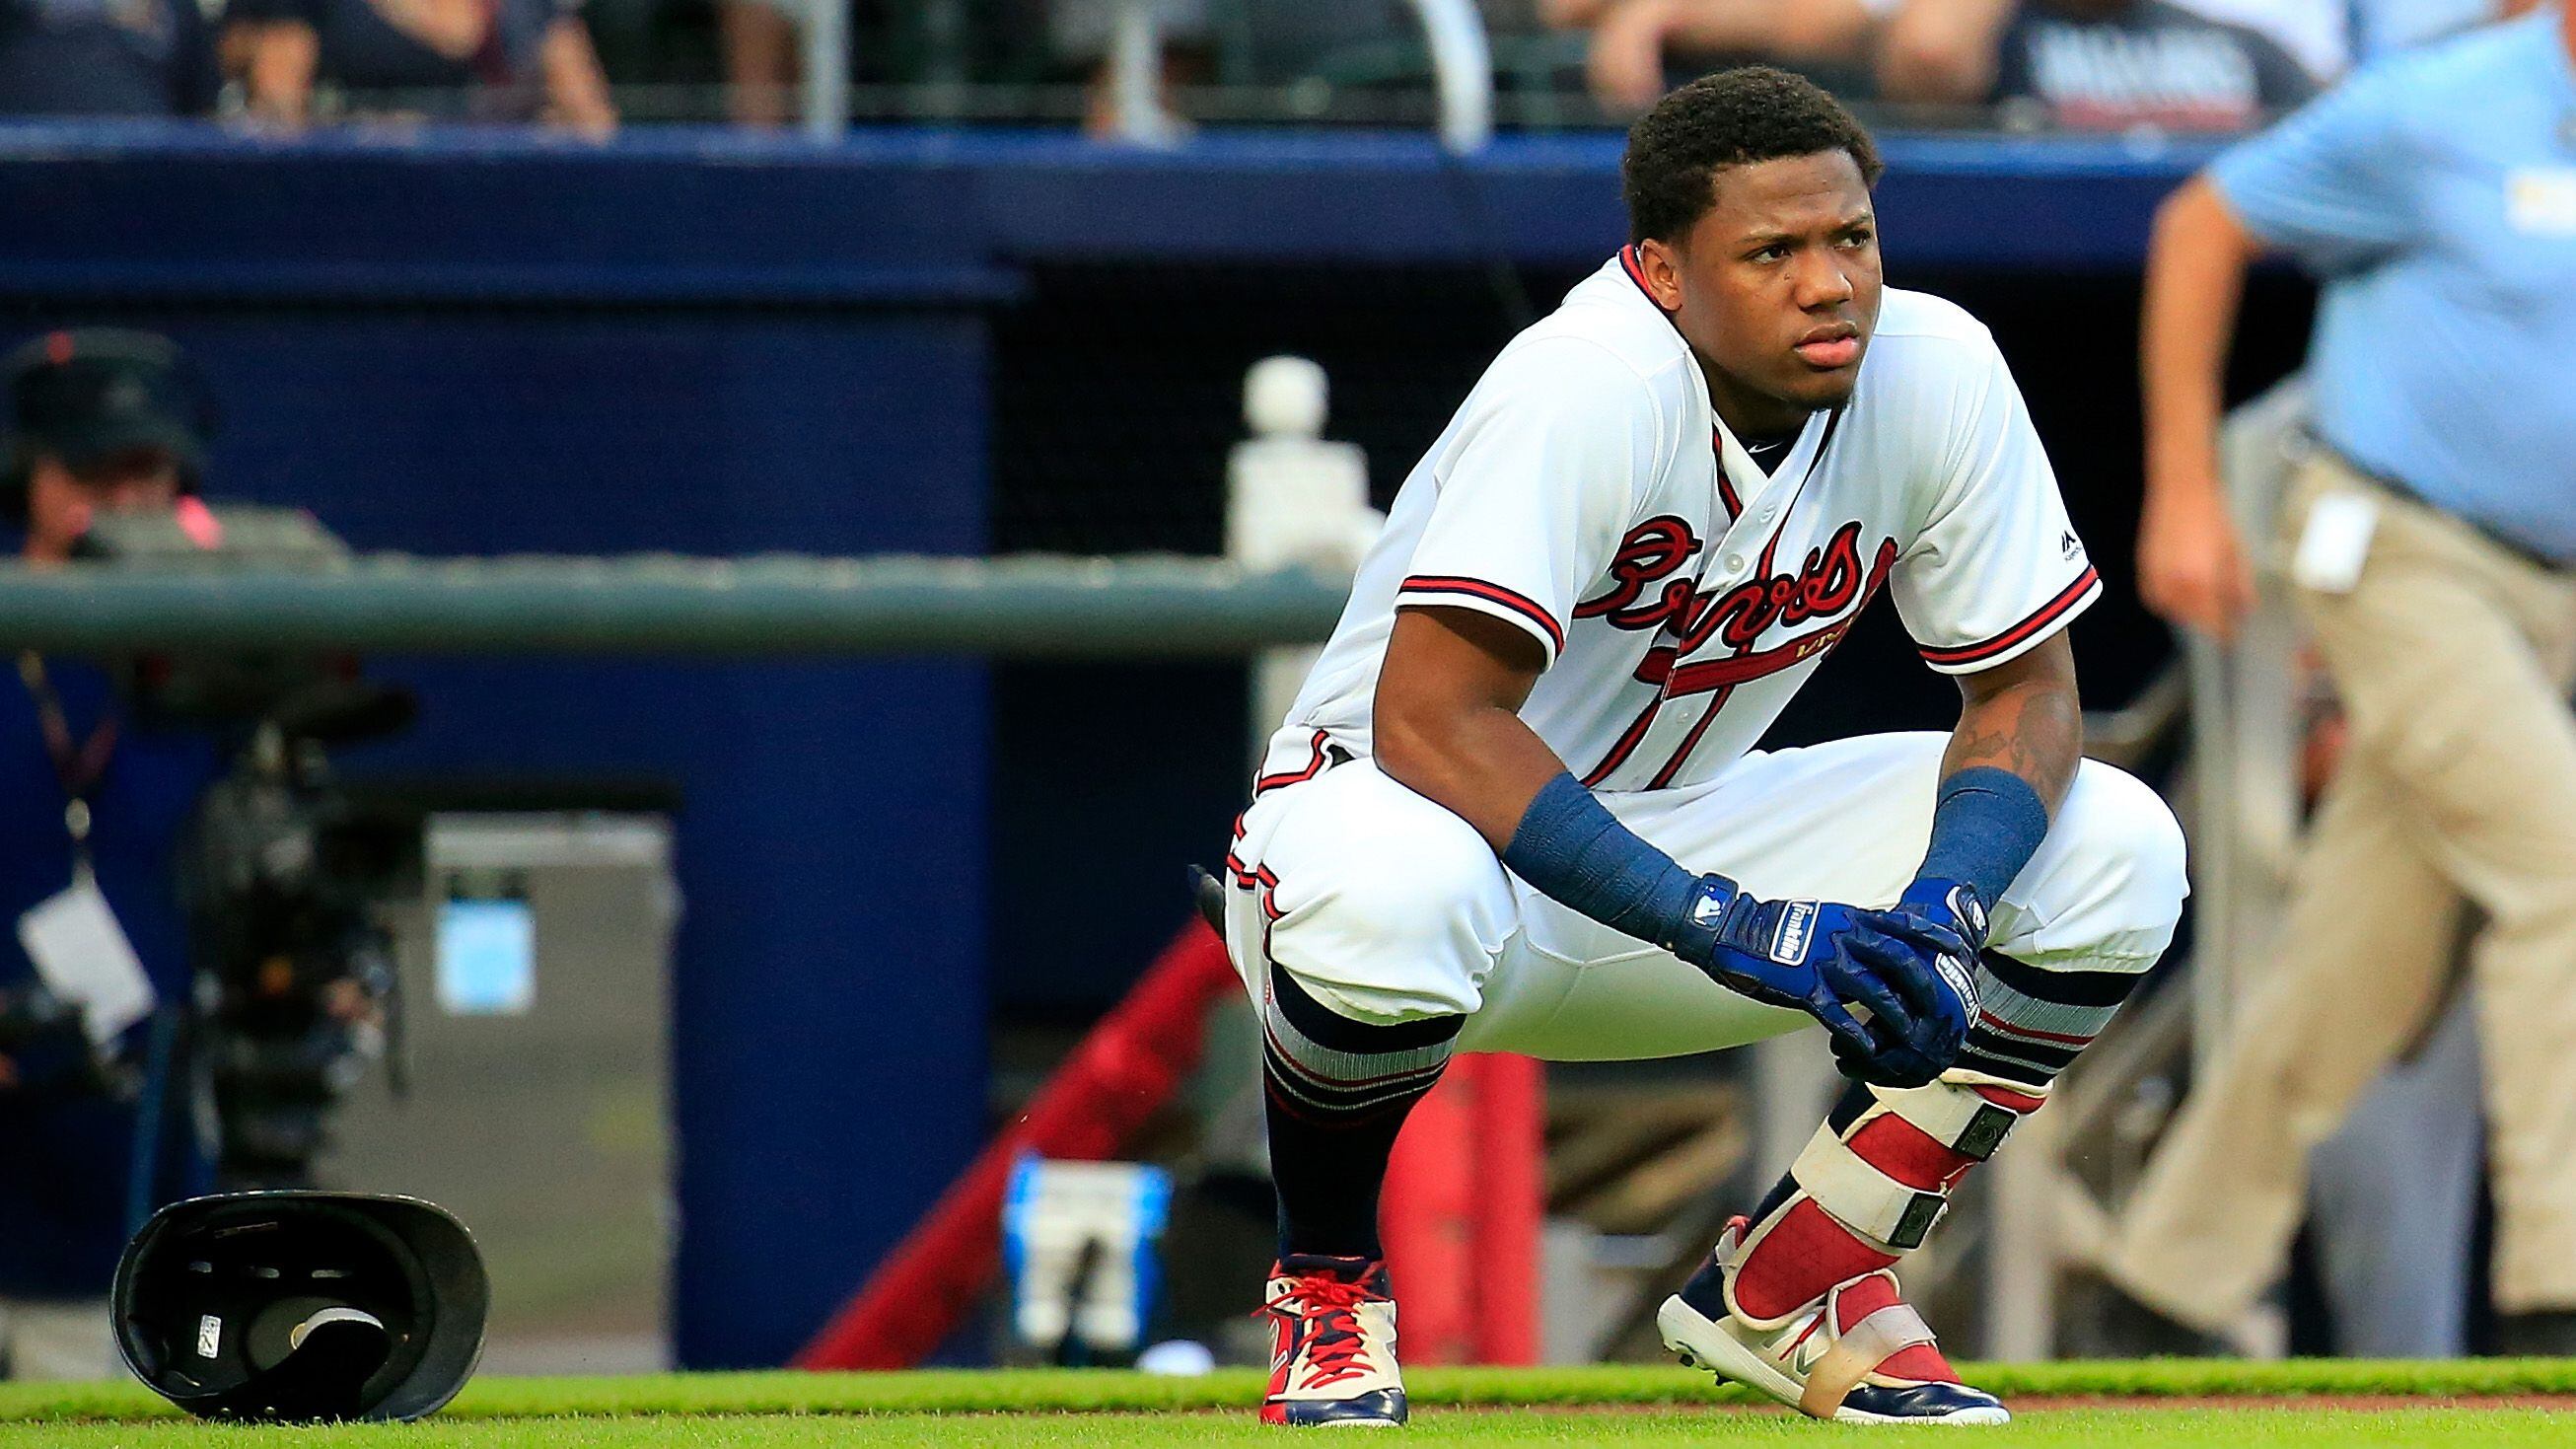 One year after injury, Ronald Acuña back playing in All-Star game